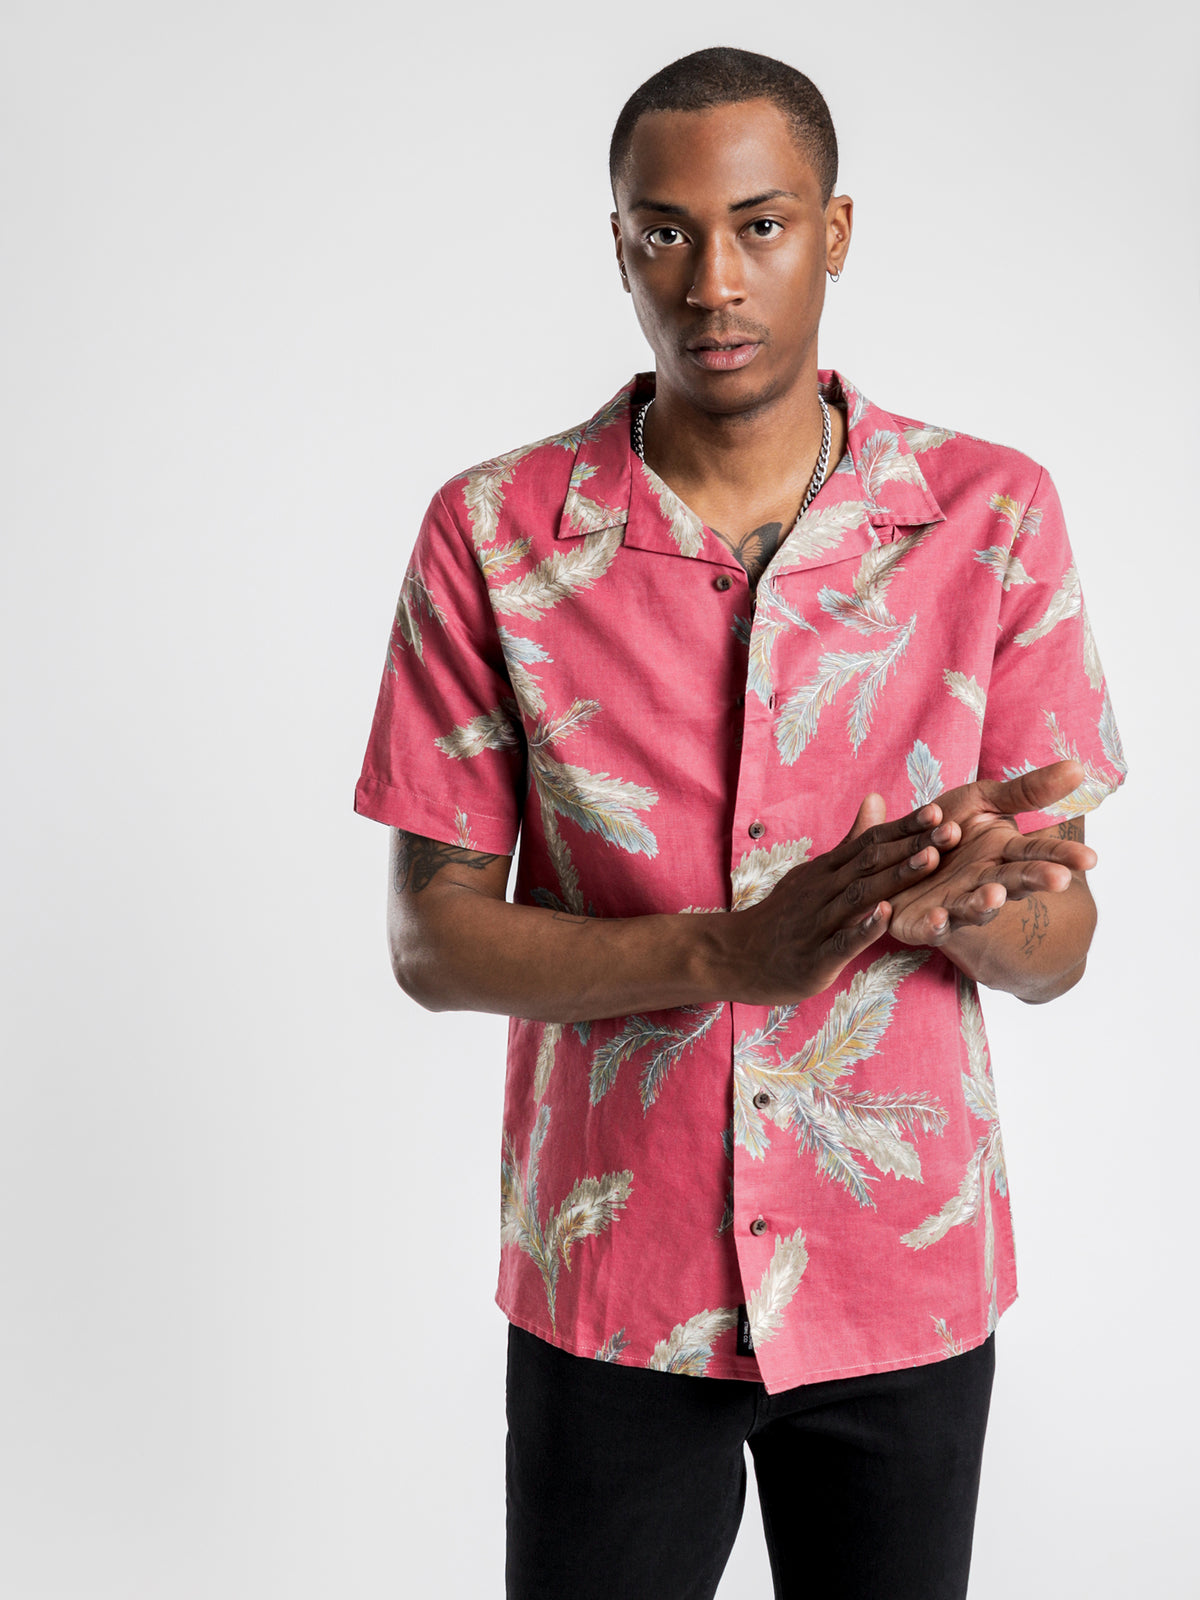 Feathered Bowling Shirt in Red Wine Palm Print